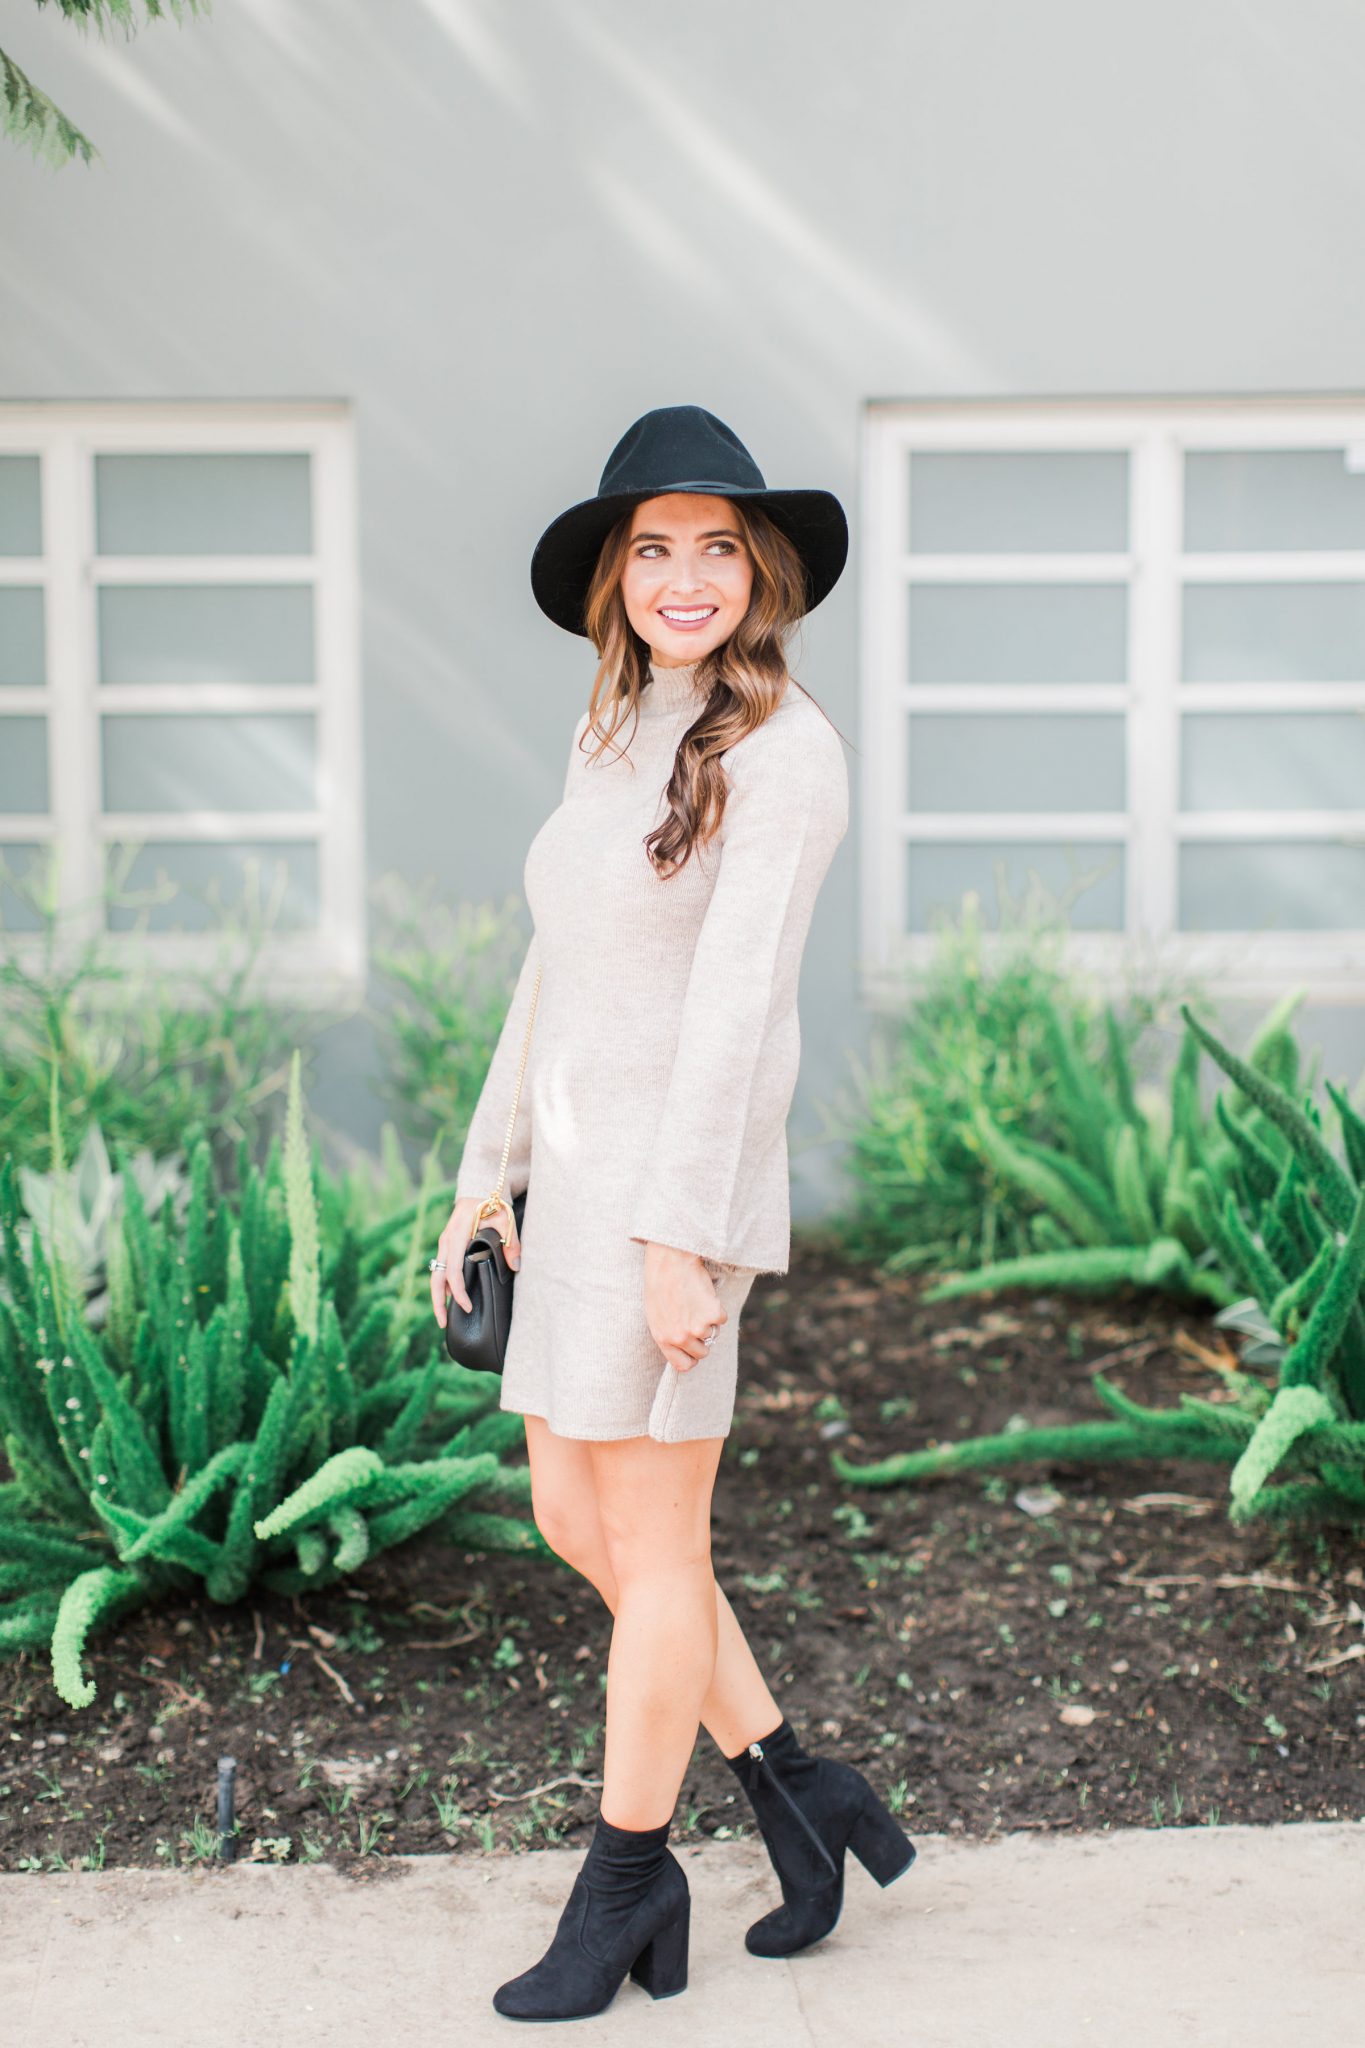 Maxie Elle | Neutral sweater dress with black hat and black booties - Wedding Skin Care Routine by popular Orange County style blogger Maxie Elle